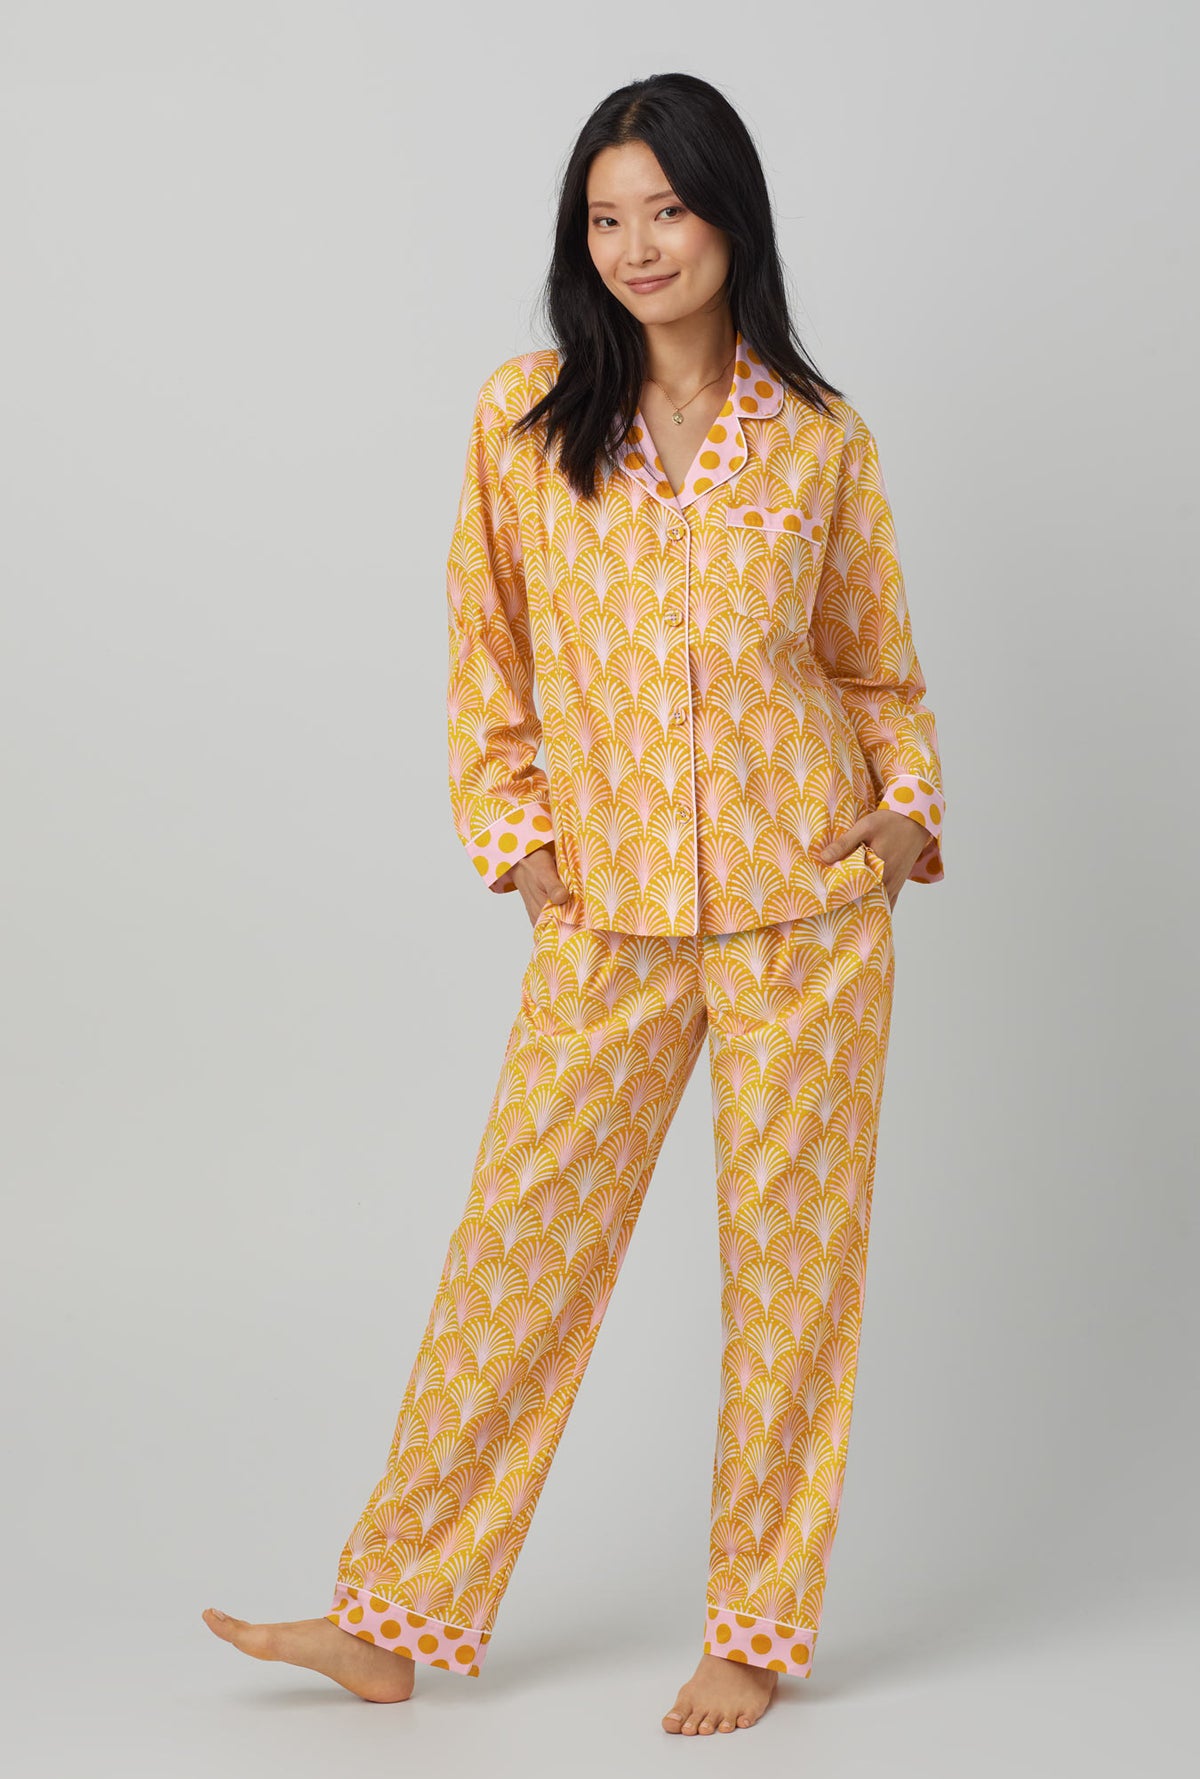 A lady wearing orange long sleeve classic woven cotton poplin pj set with suite life print